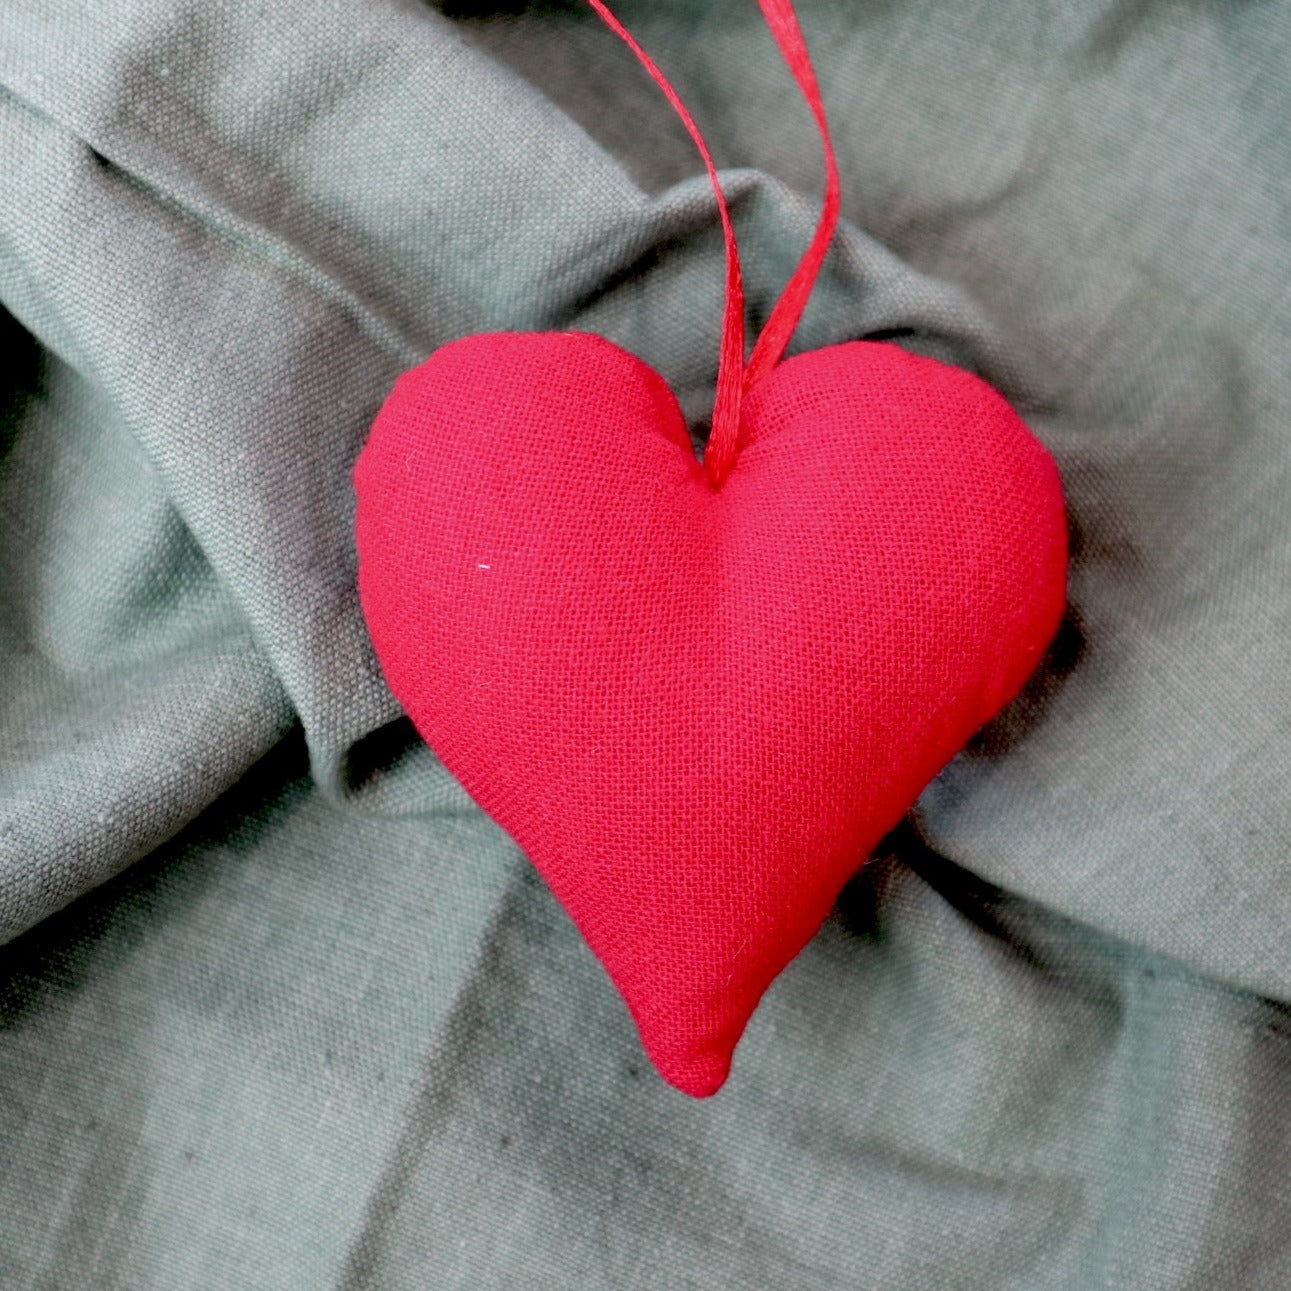 Fair Trade Remnant Fabric Heart Decorations - Red